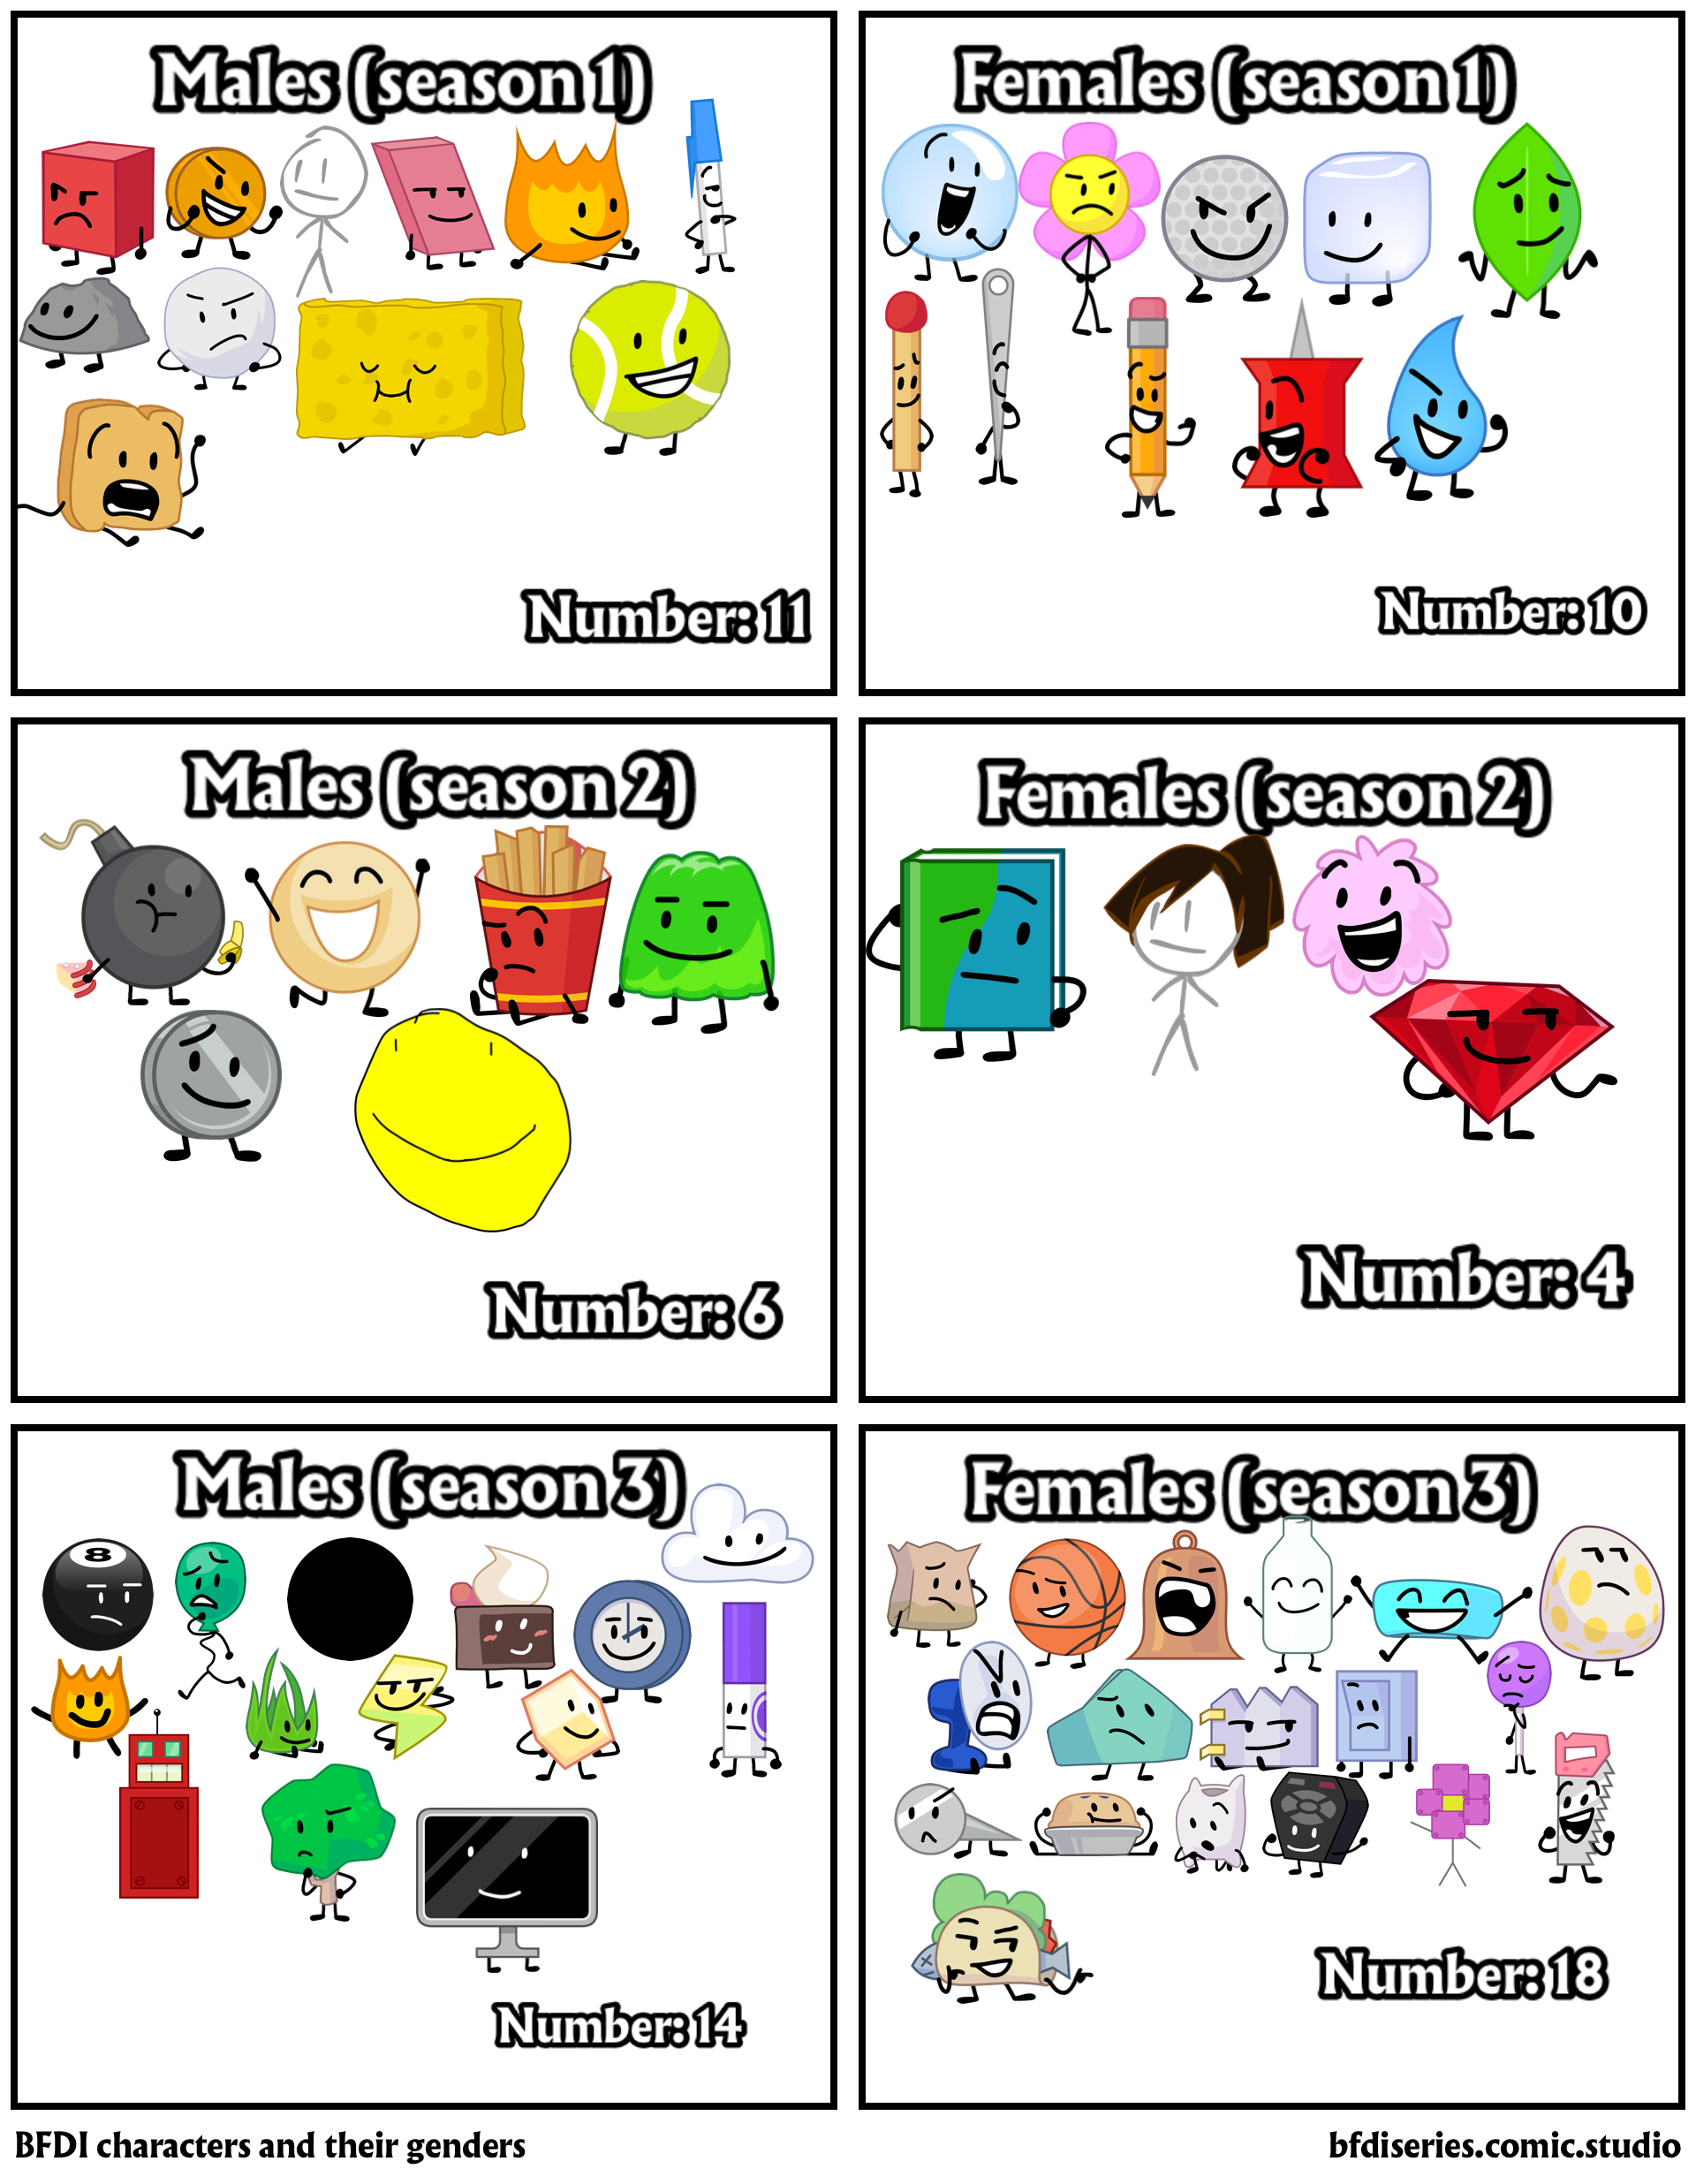 BFDI characters and their genders